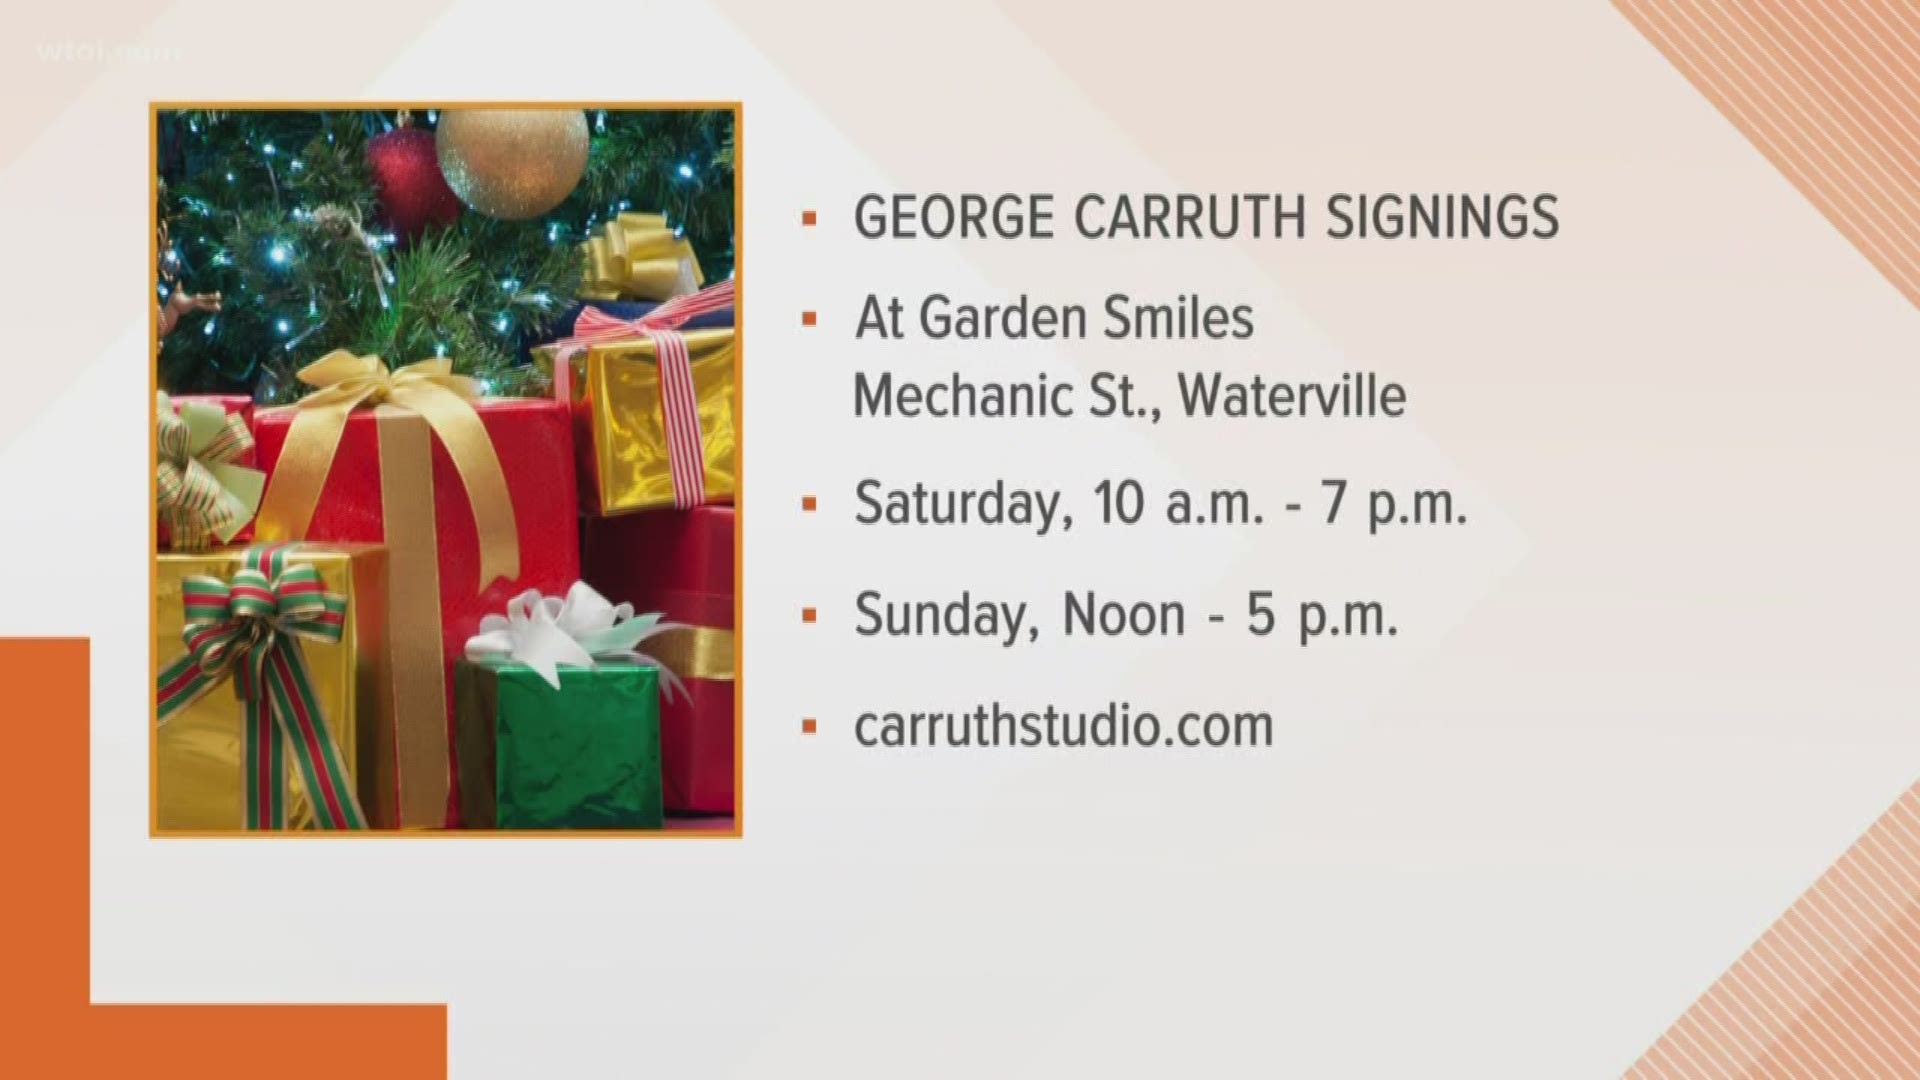 George Carruth is known throughout the world and he has a workshop right here in northwest Ohio.